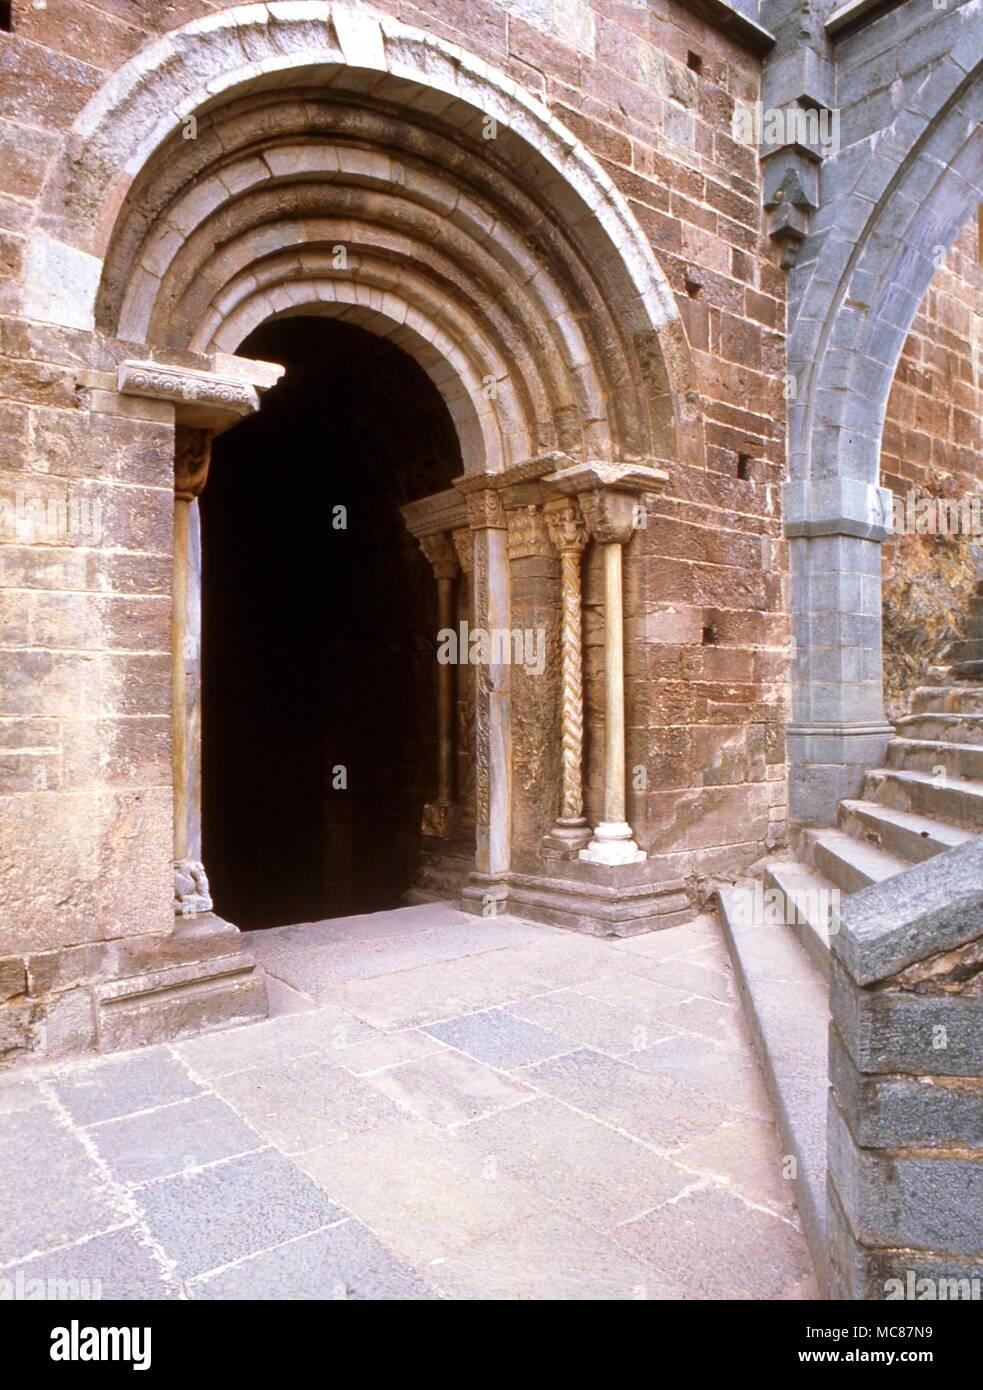 Astrological Site Susa Main doorway at the top of the staircase of the Dead with the outer section of the so called zodiacal arch at Sagra di San Michele Val di Susa Thirteenth Century Stock Photo